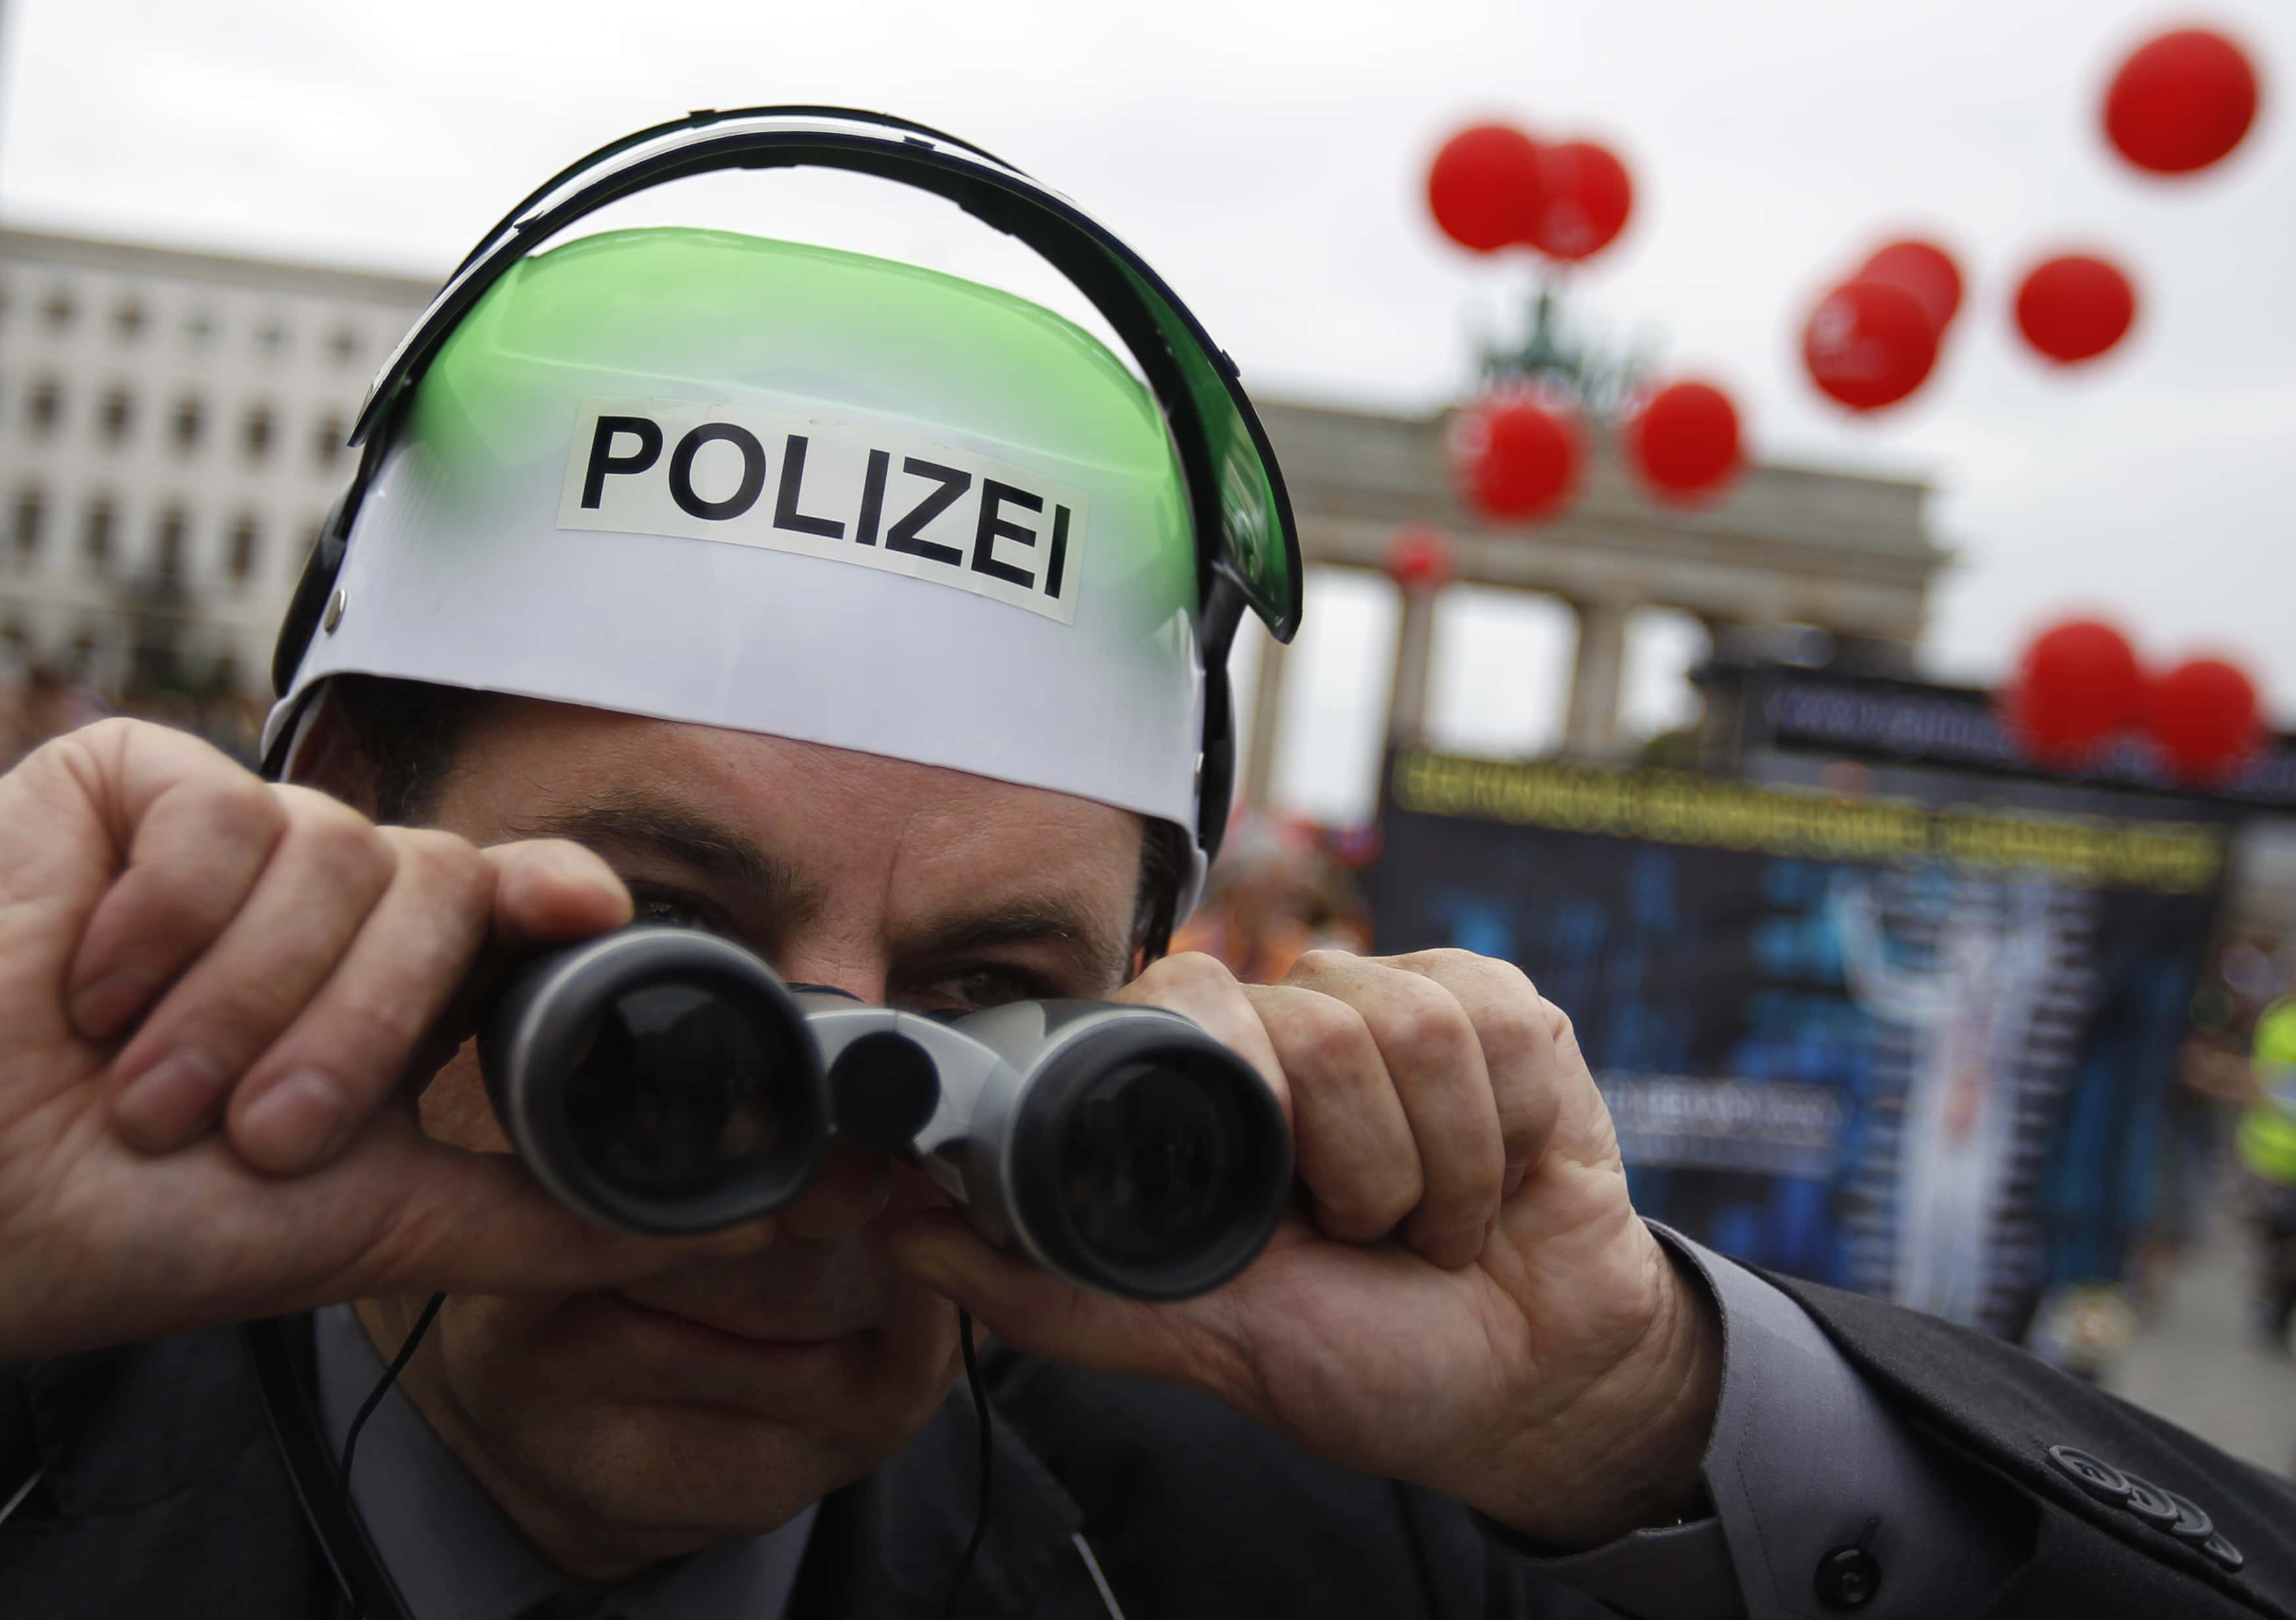 A man wears a fake police helmet during a "Freedom instead of Fear" protest calling for the protection of digital data privacy in Berlin, 10 September 2011 , REUTERS/Thomas Peter